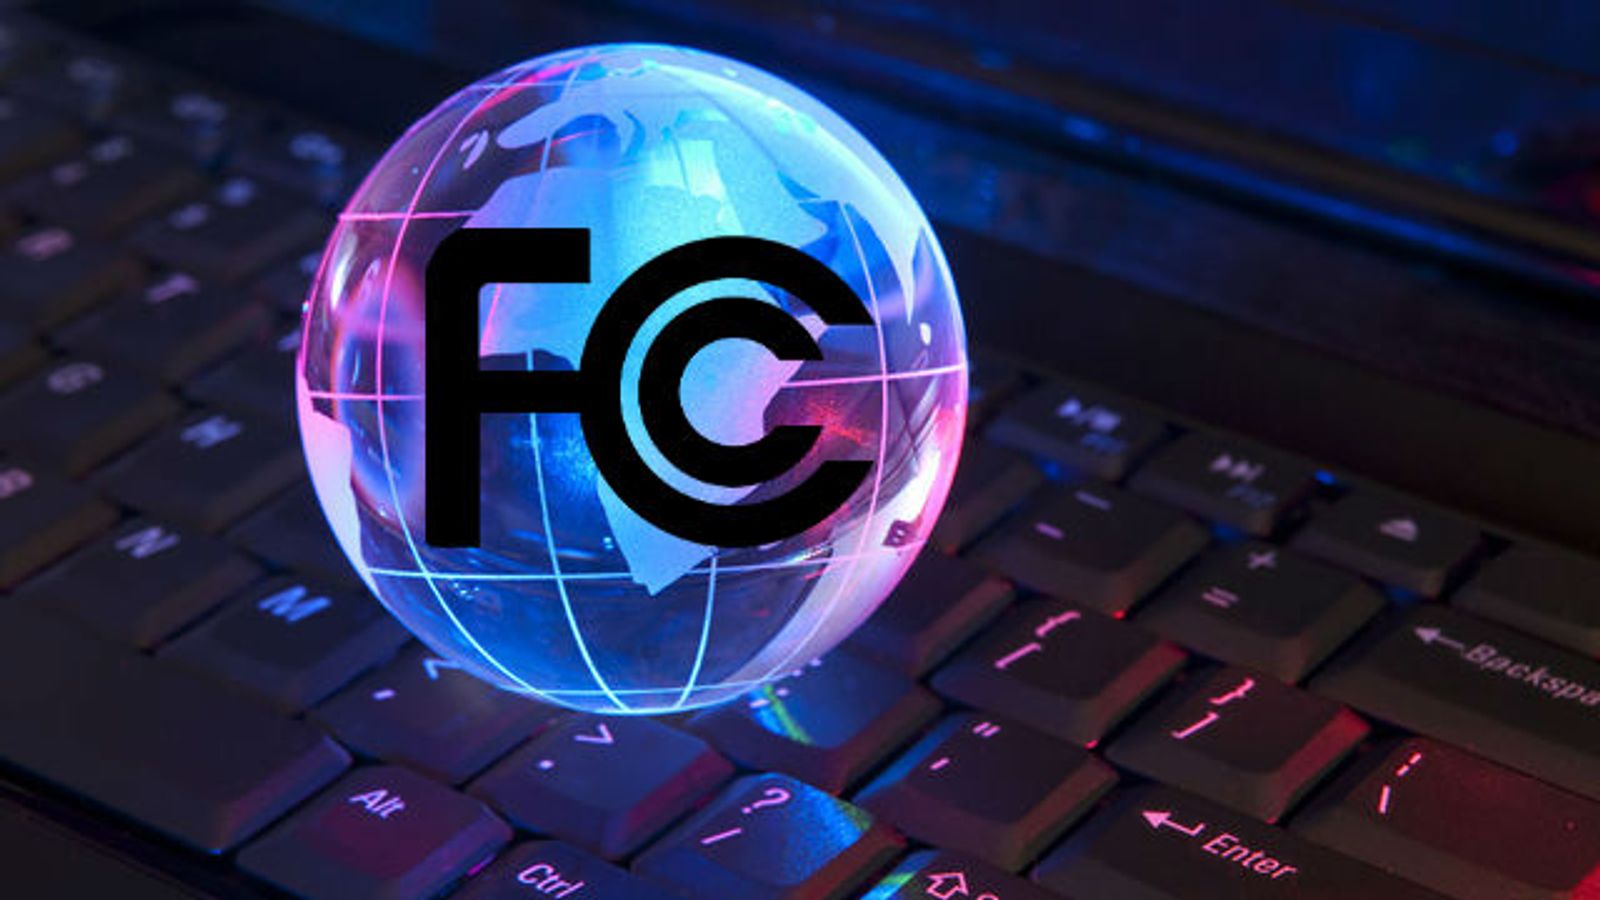 FCC Releases Text of Approved Net Neutrality Order